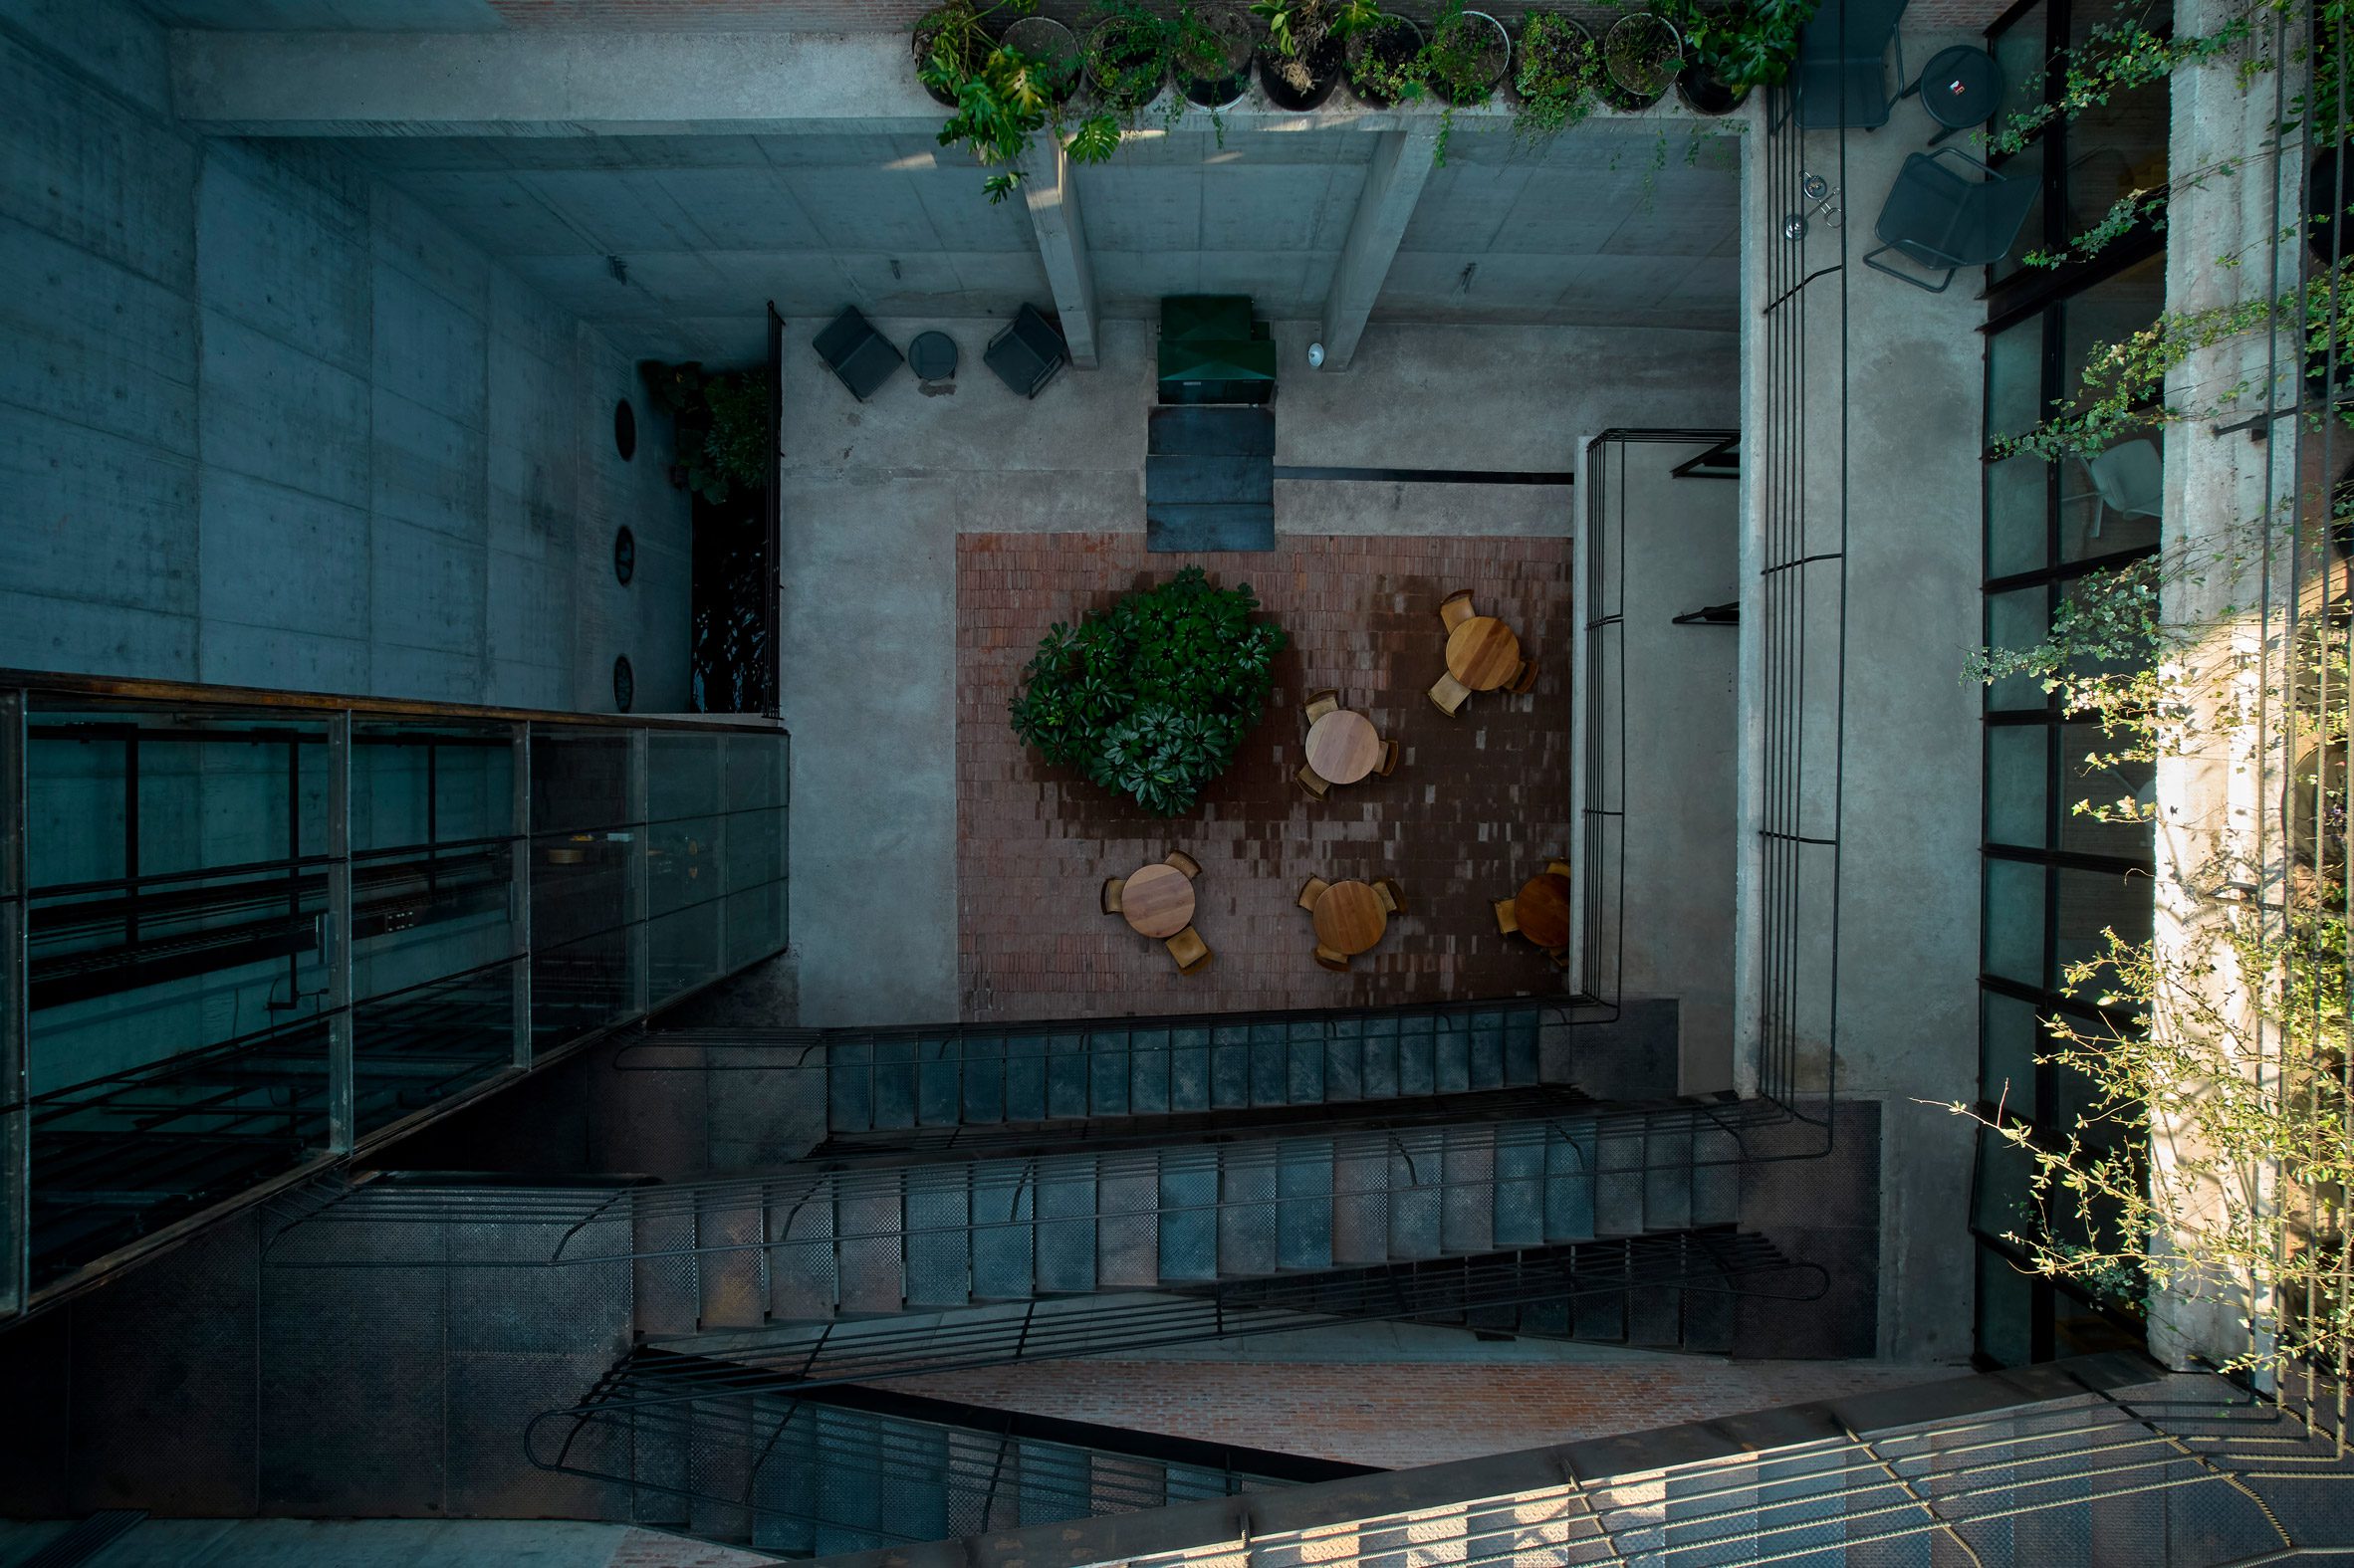 Aerial view of interior courtyard